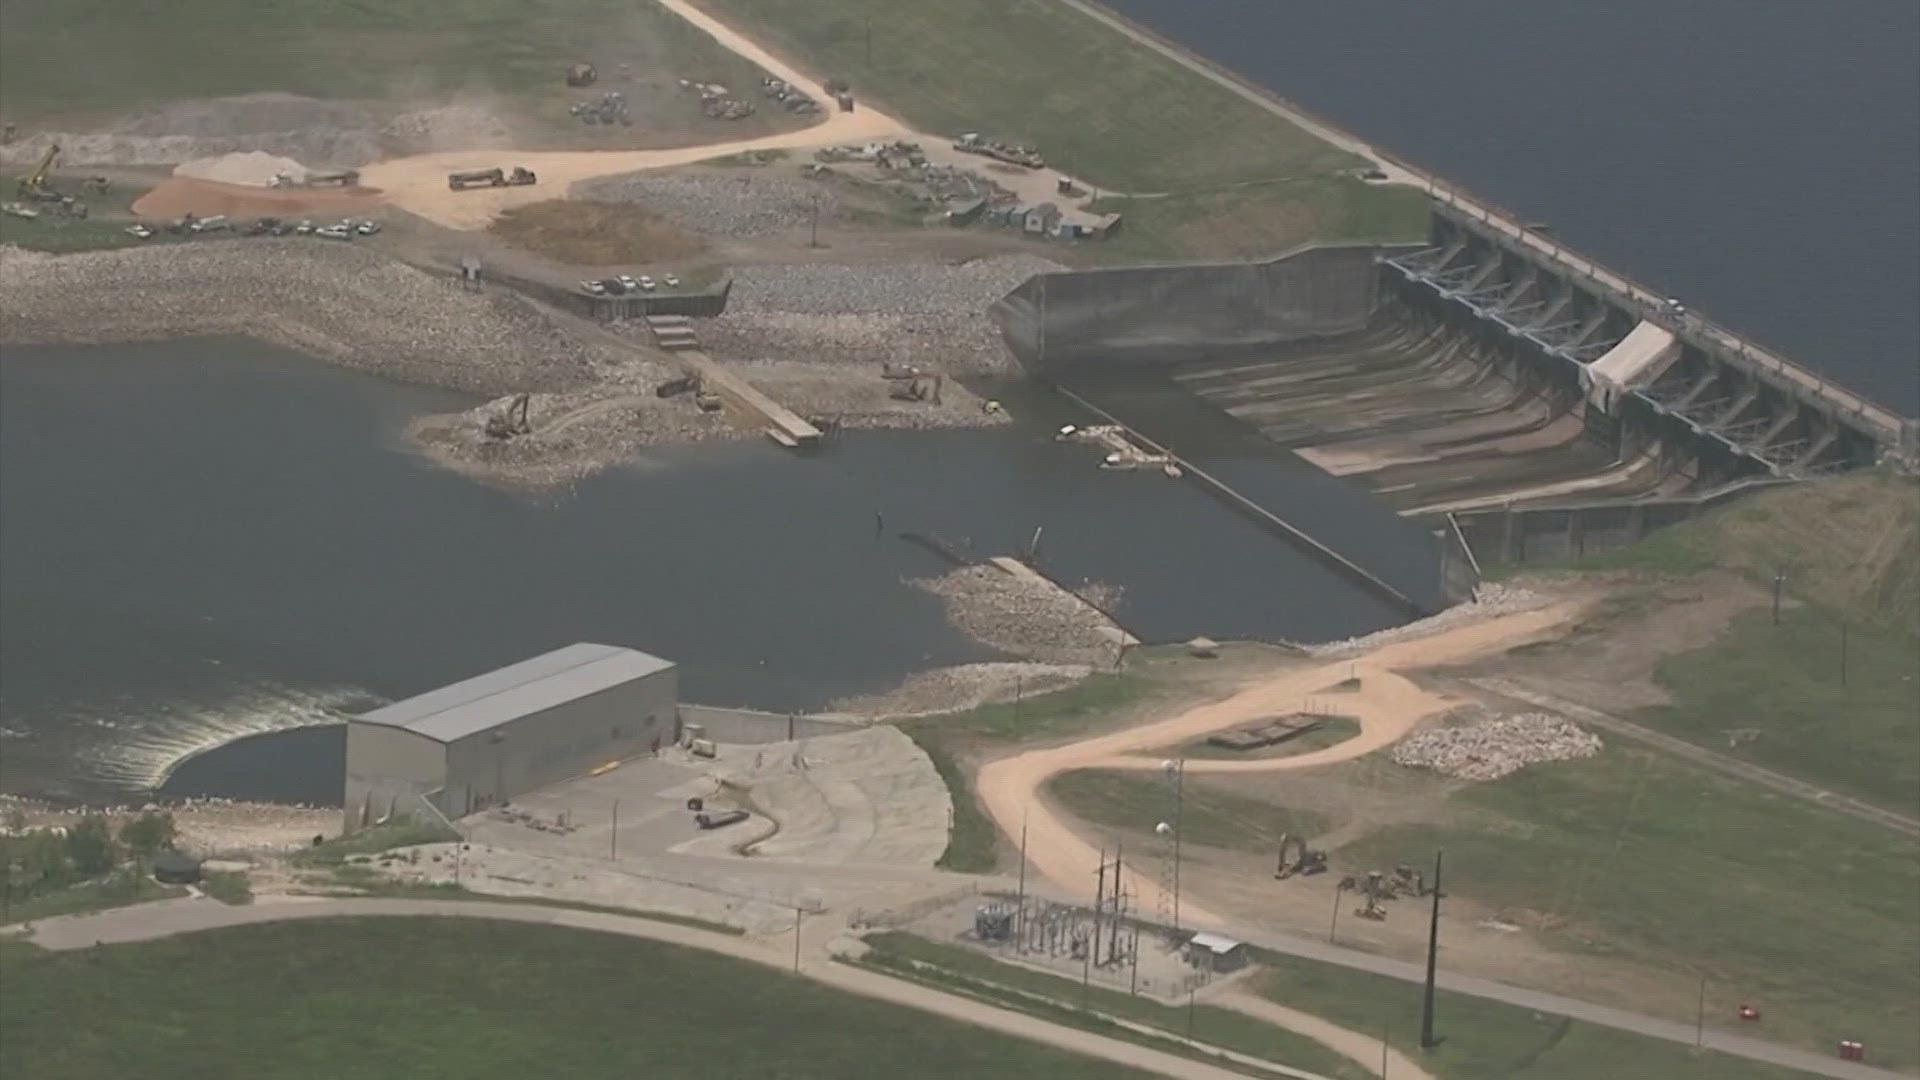 Officials said the dam should be able to handle a larger amount of water by Monday.